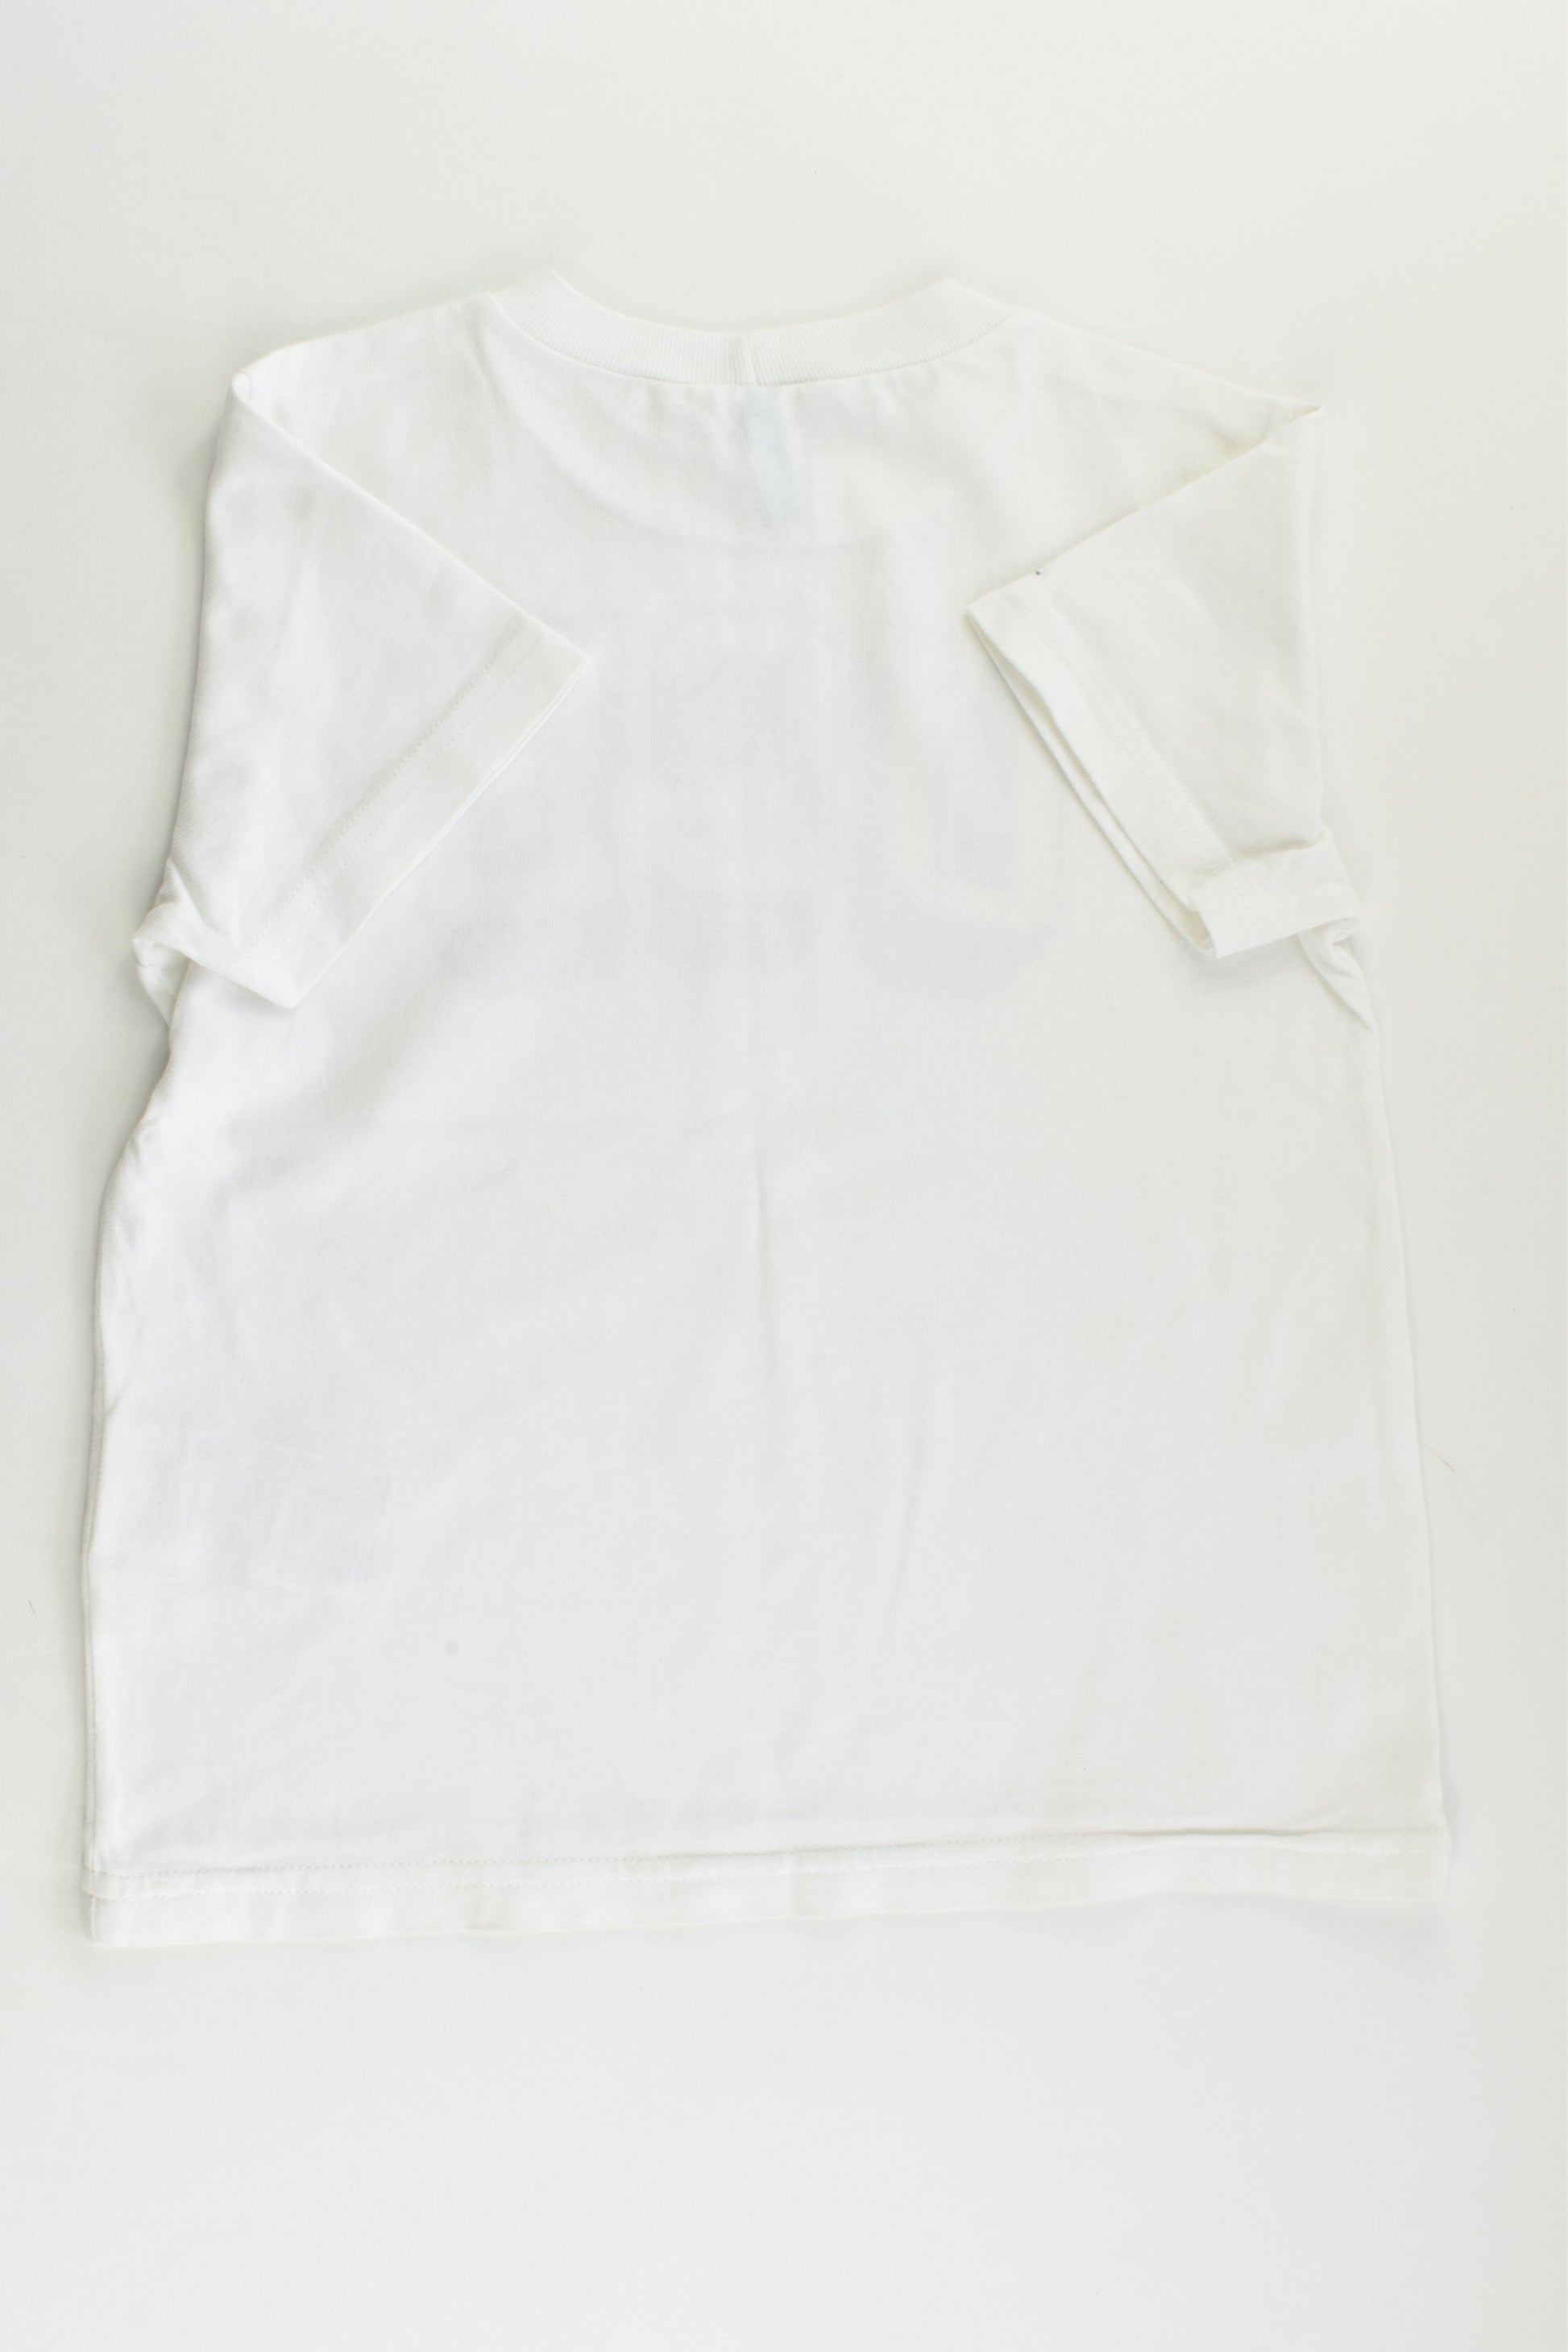 United Colors of Benetton (Italy) Size 4-5 (110 cm) White T-shirt